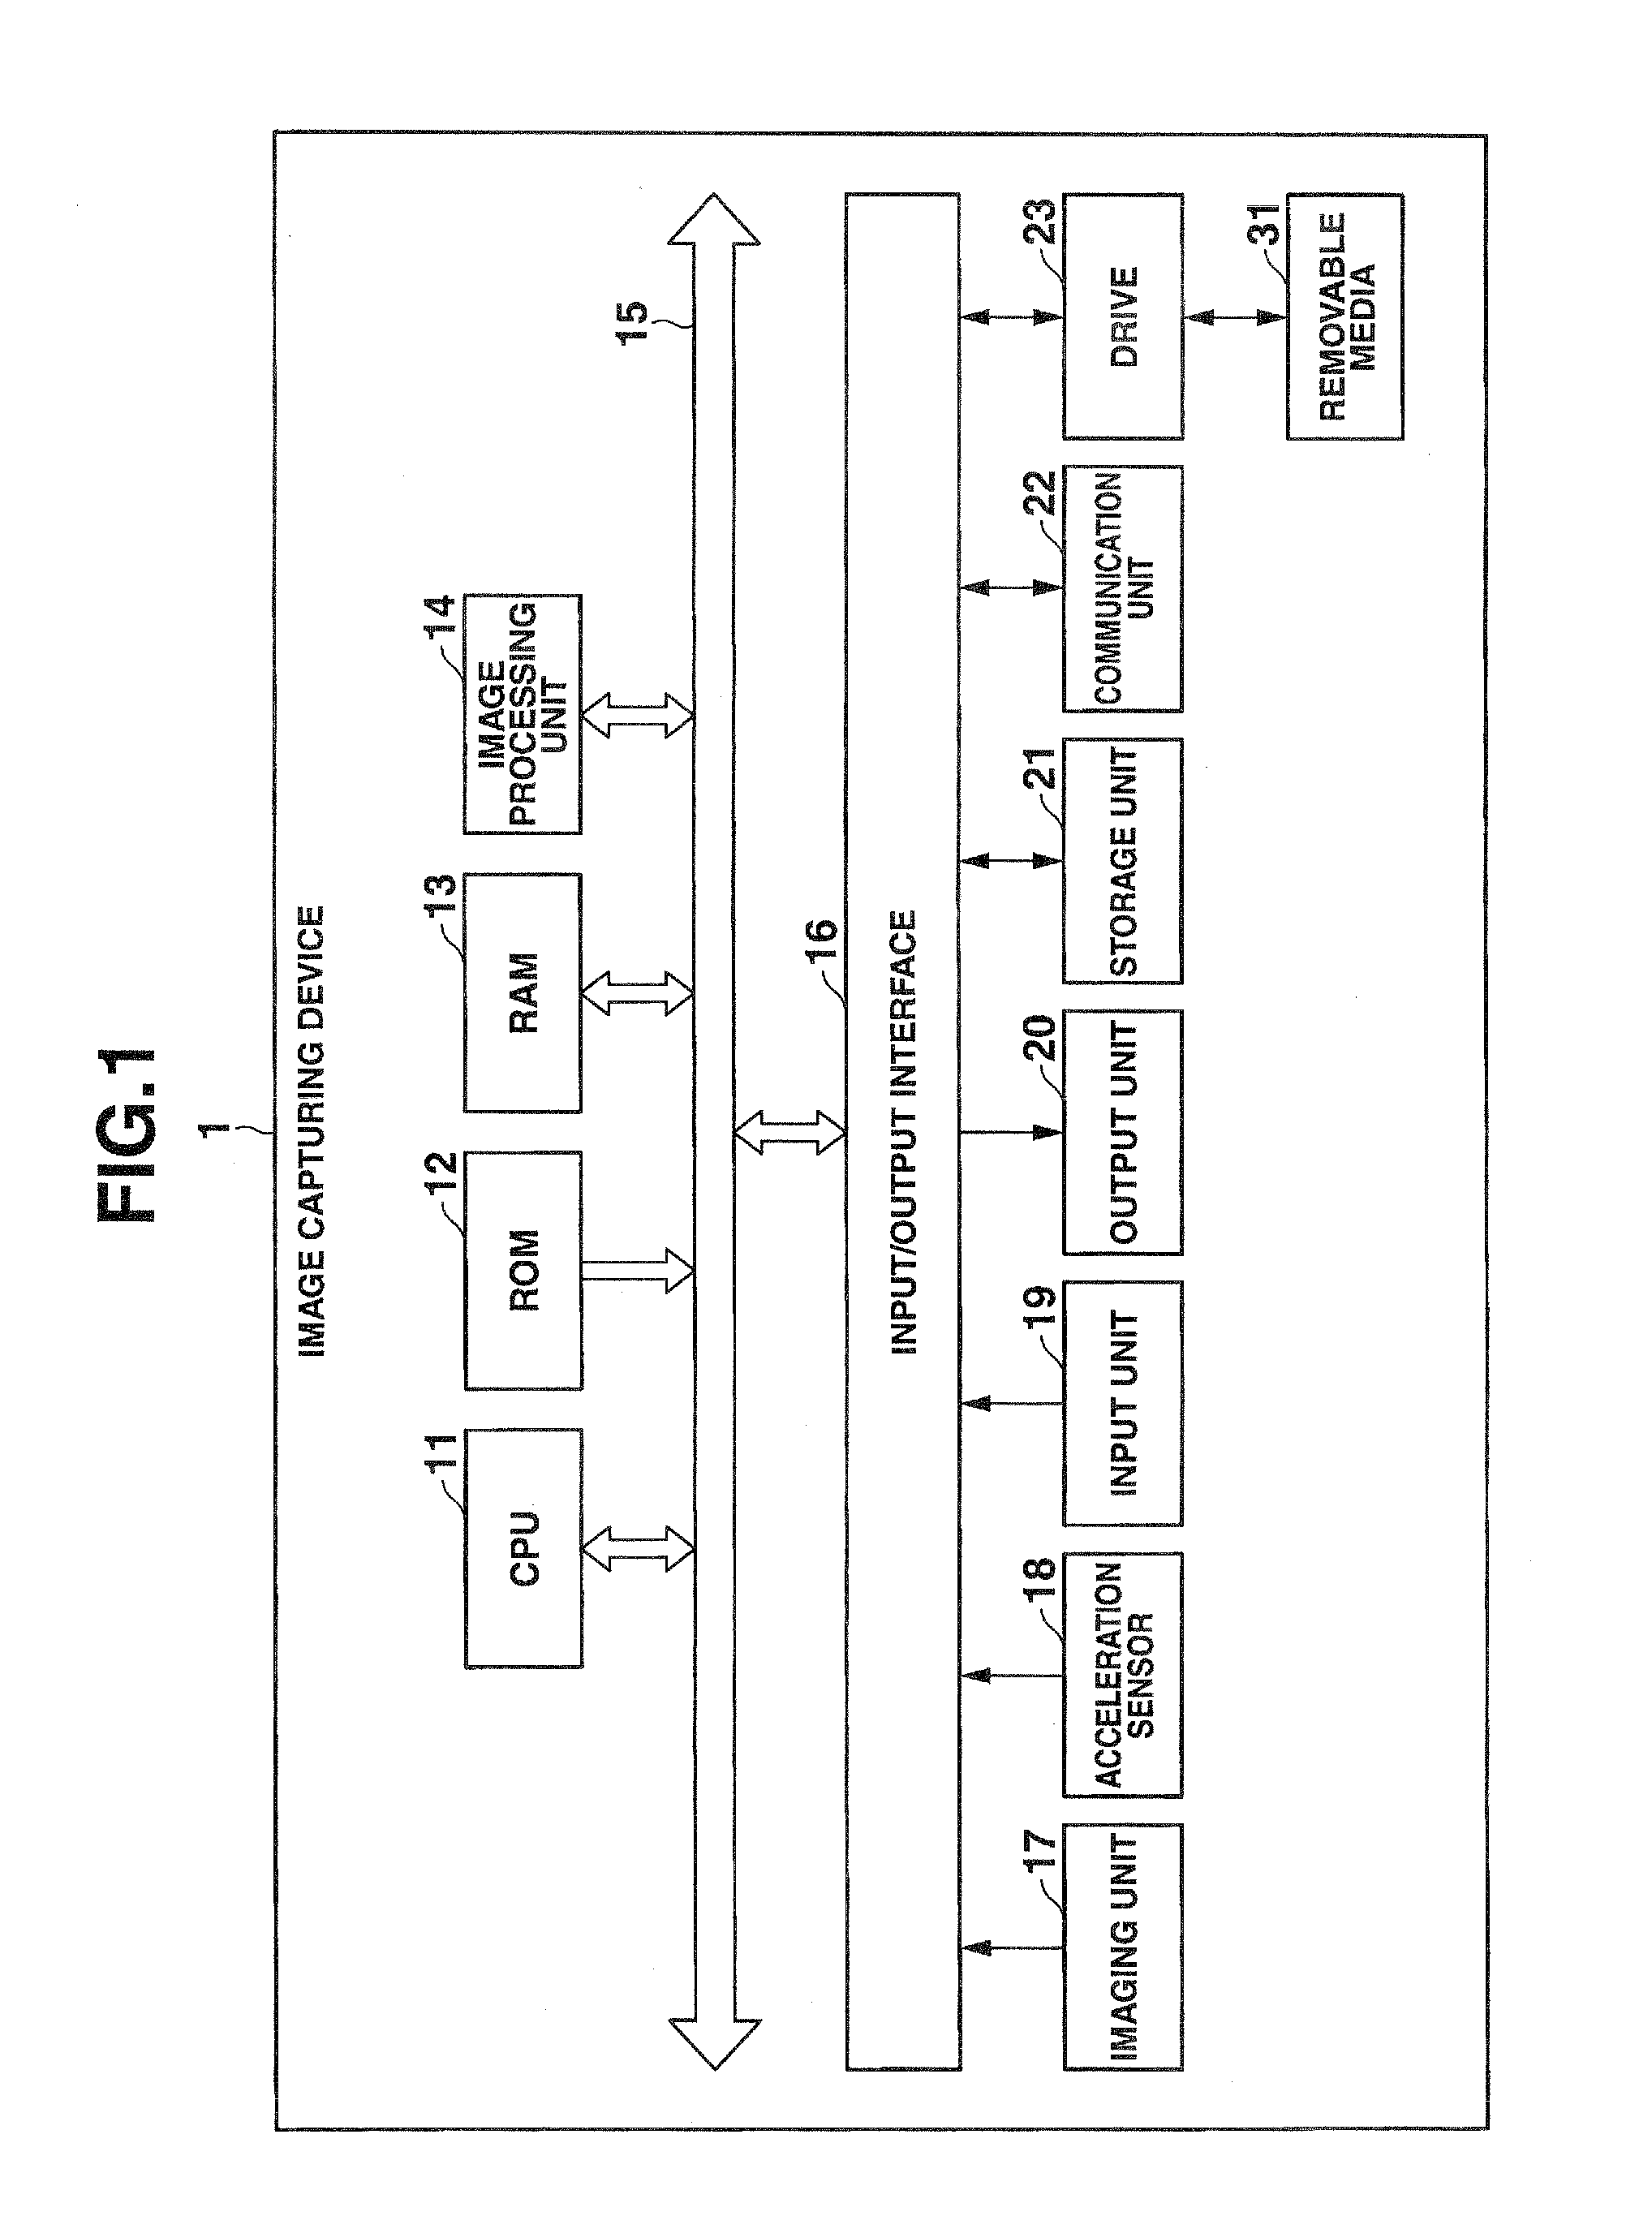 Image processing device that combines a plurality of images